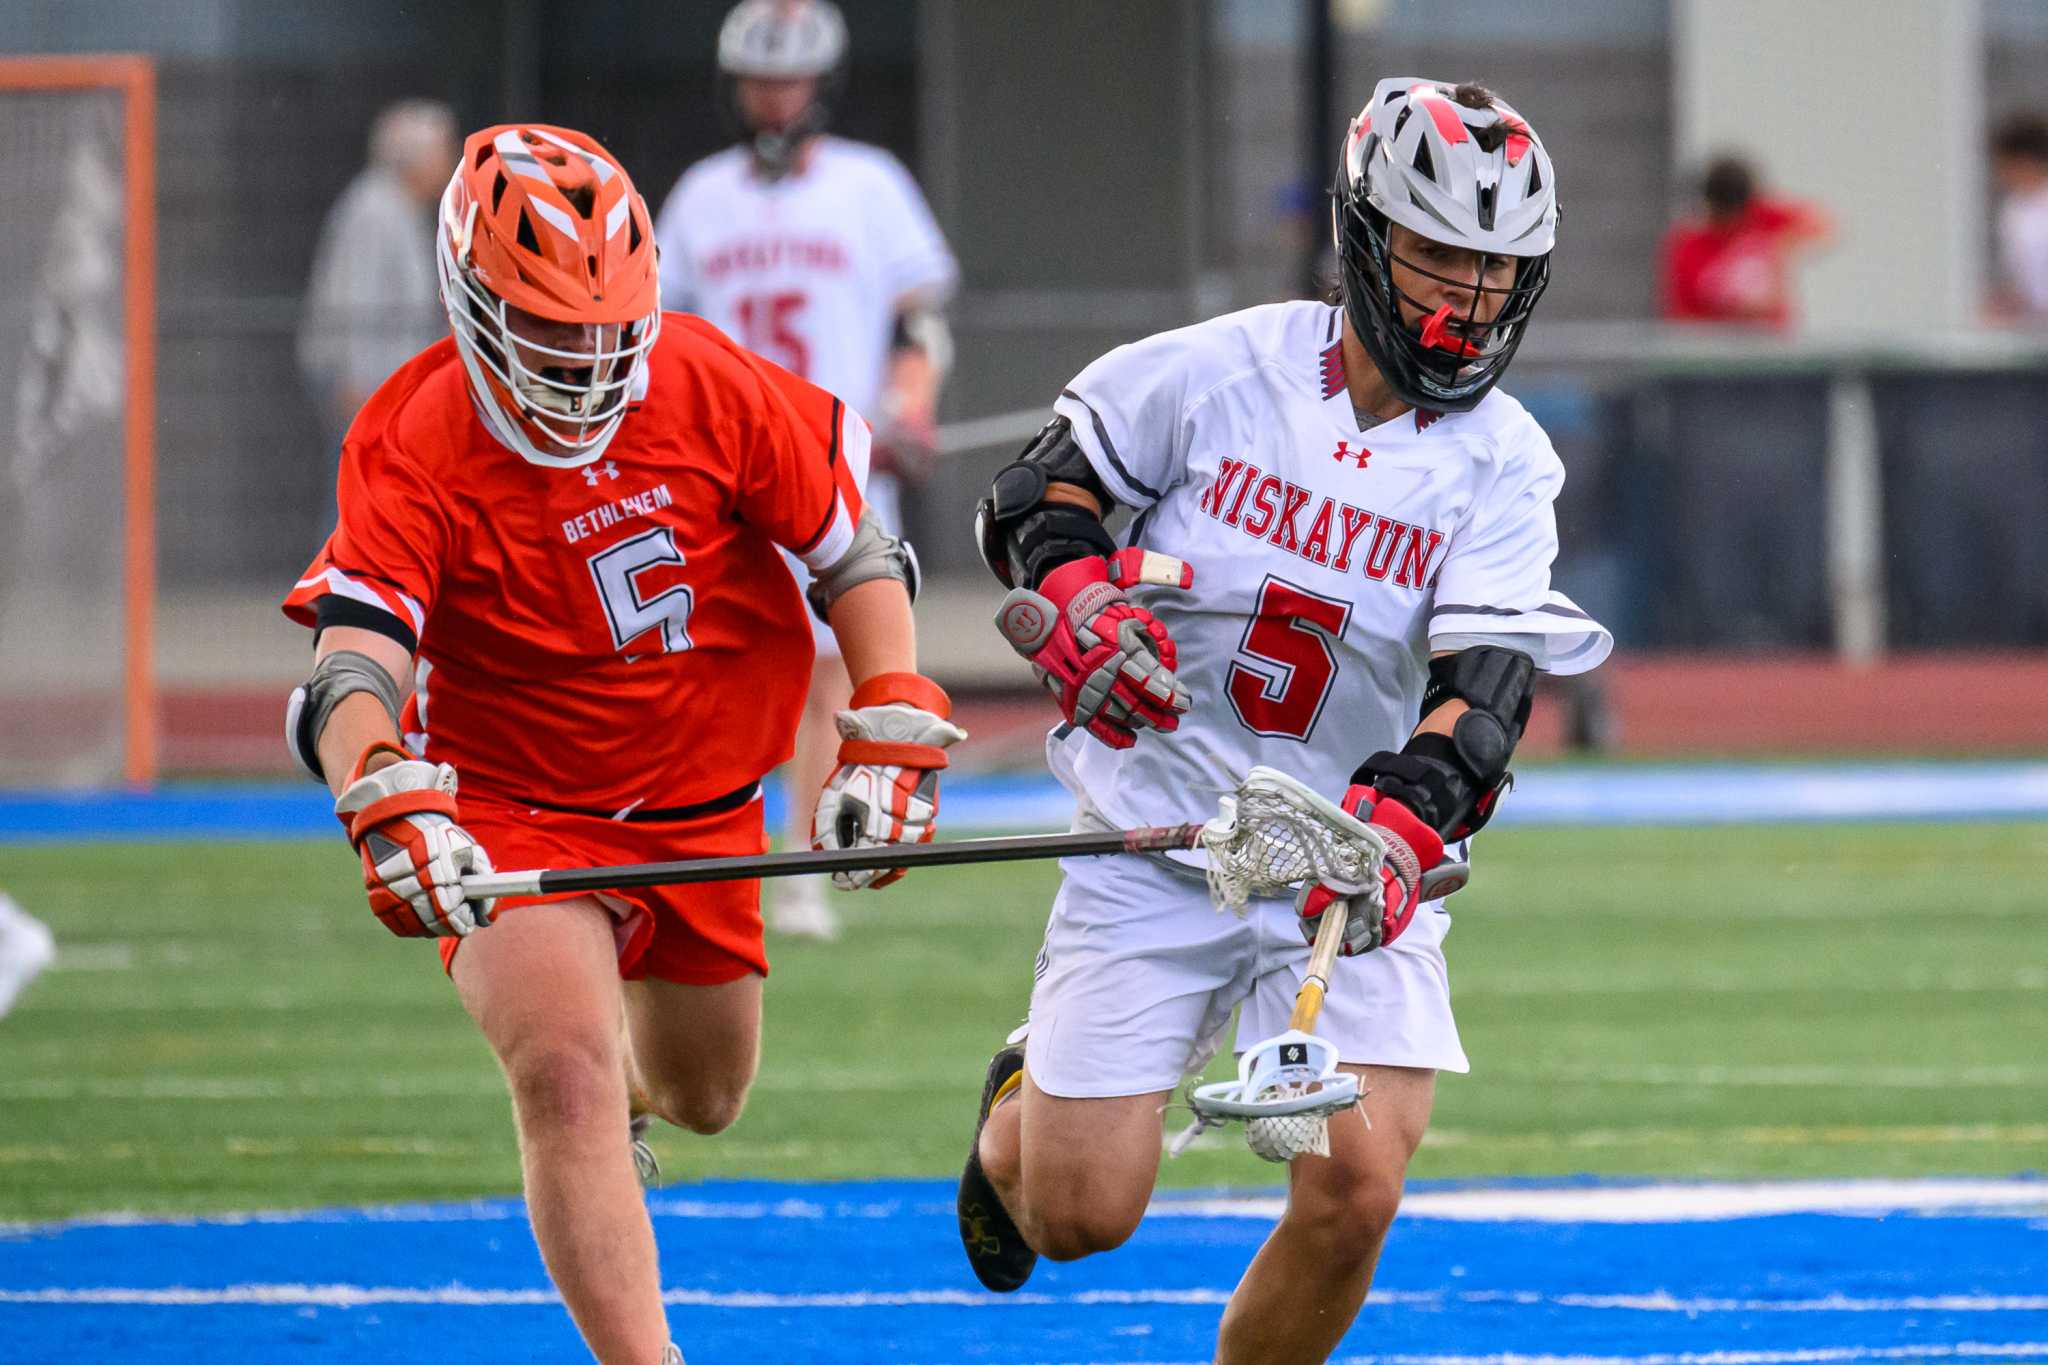 Niskayuna captures 20th sectional boys' lacrosse title with win over Bethlehem